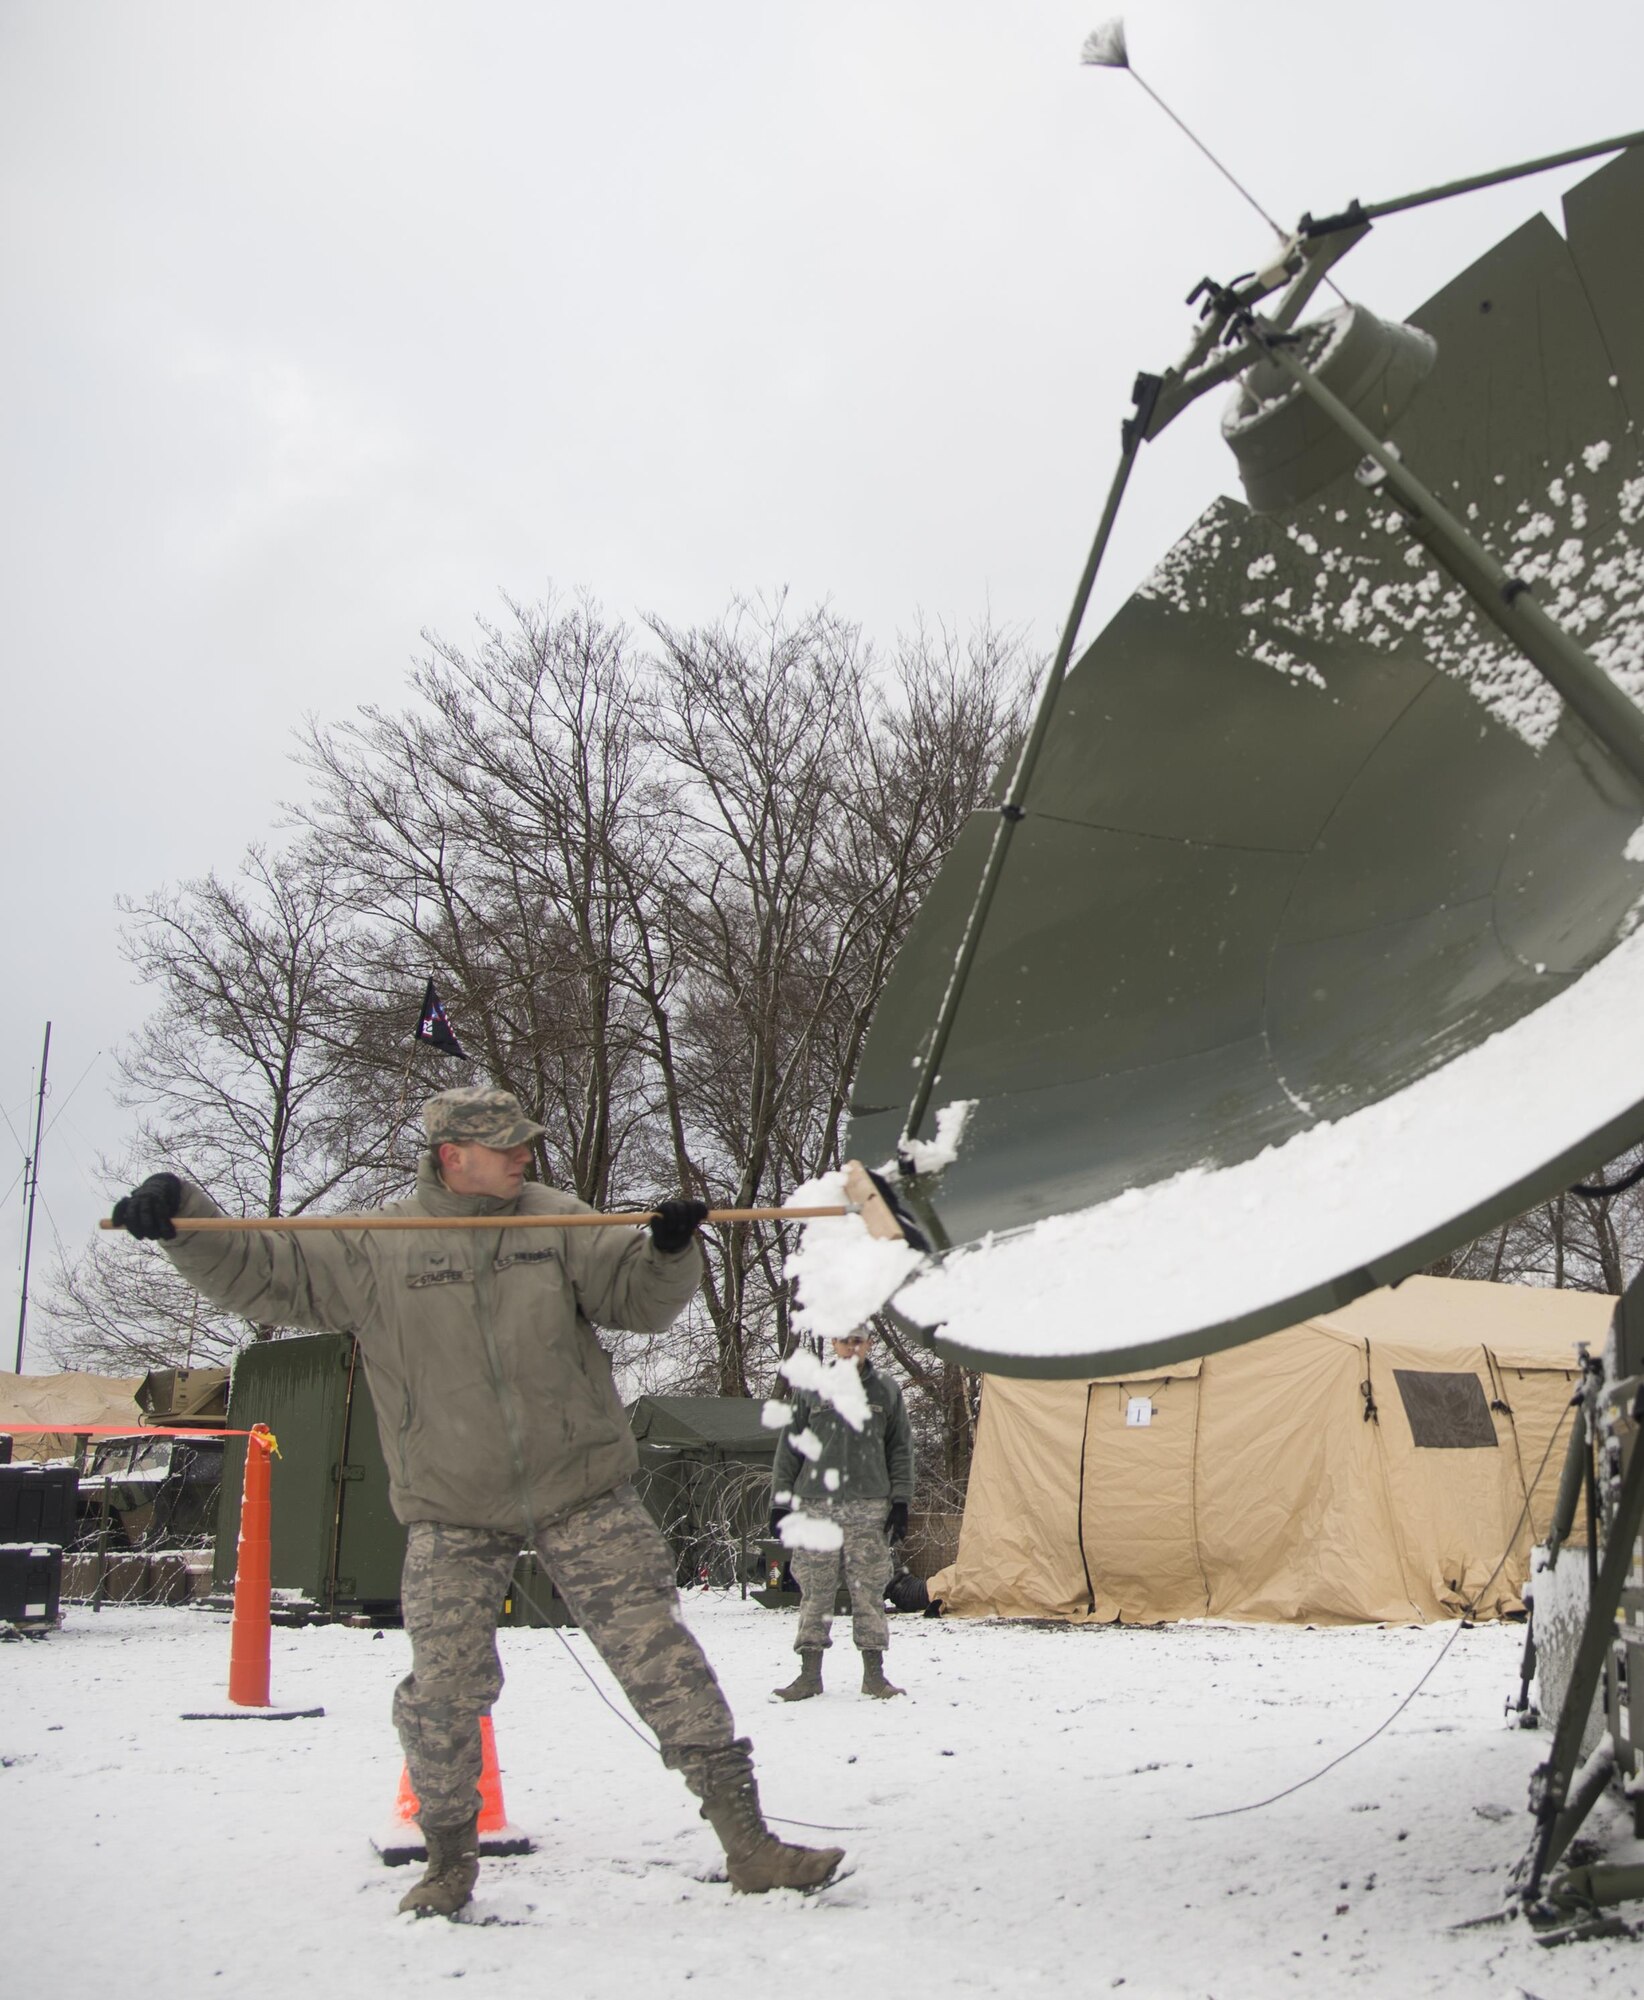 Senior Airman Erik Stauffer cleans snow off of a satellite during exercise Juniper Thunder Jan. 30, 2015, at Ramstein Air Base, Germany. Juniper Thunder aimed to help the interoperability between Air Force and Army combat communications systems. Stauffer is a transmissions systems technician assigned to the 1st Combat Communications Squadron. (U.S. Air Force photo/Senior Airman Jonathan Stefanko)